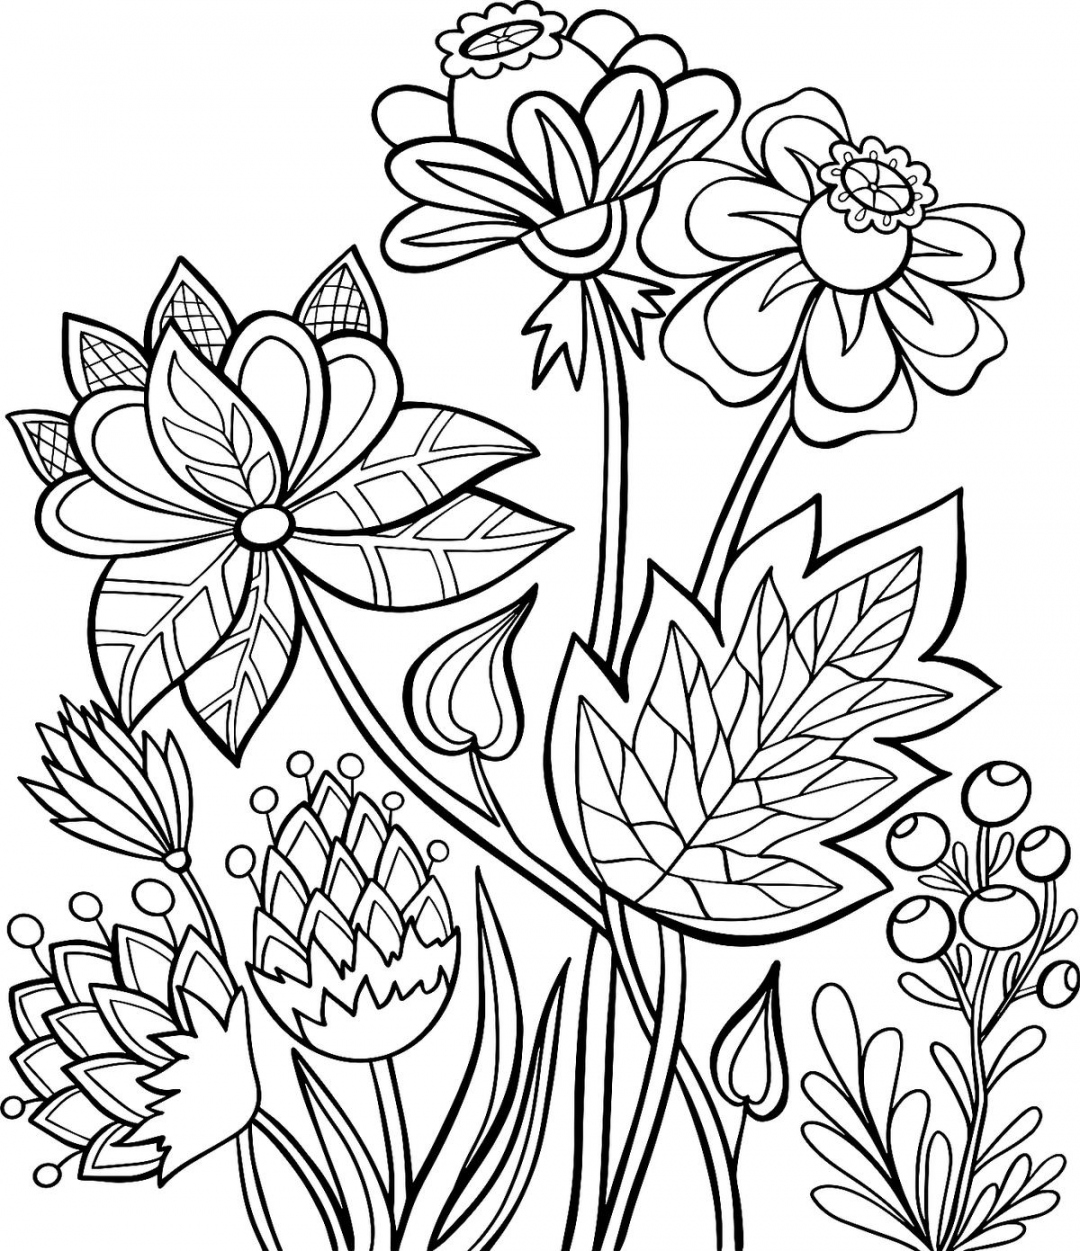 Free Printable Coloring Pages of Flowers - Printable - Spring Flowers Coloring Pages:  Free Printable Coloring Pages of